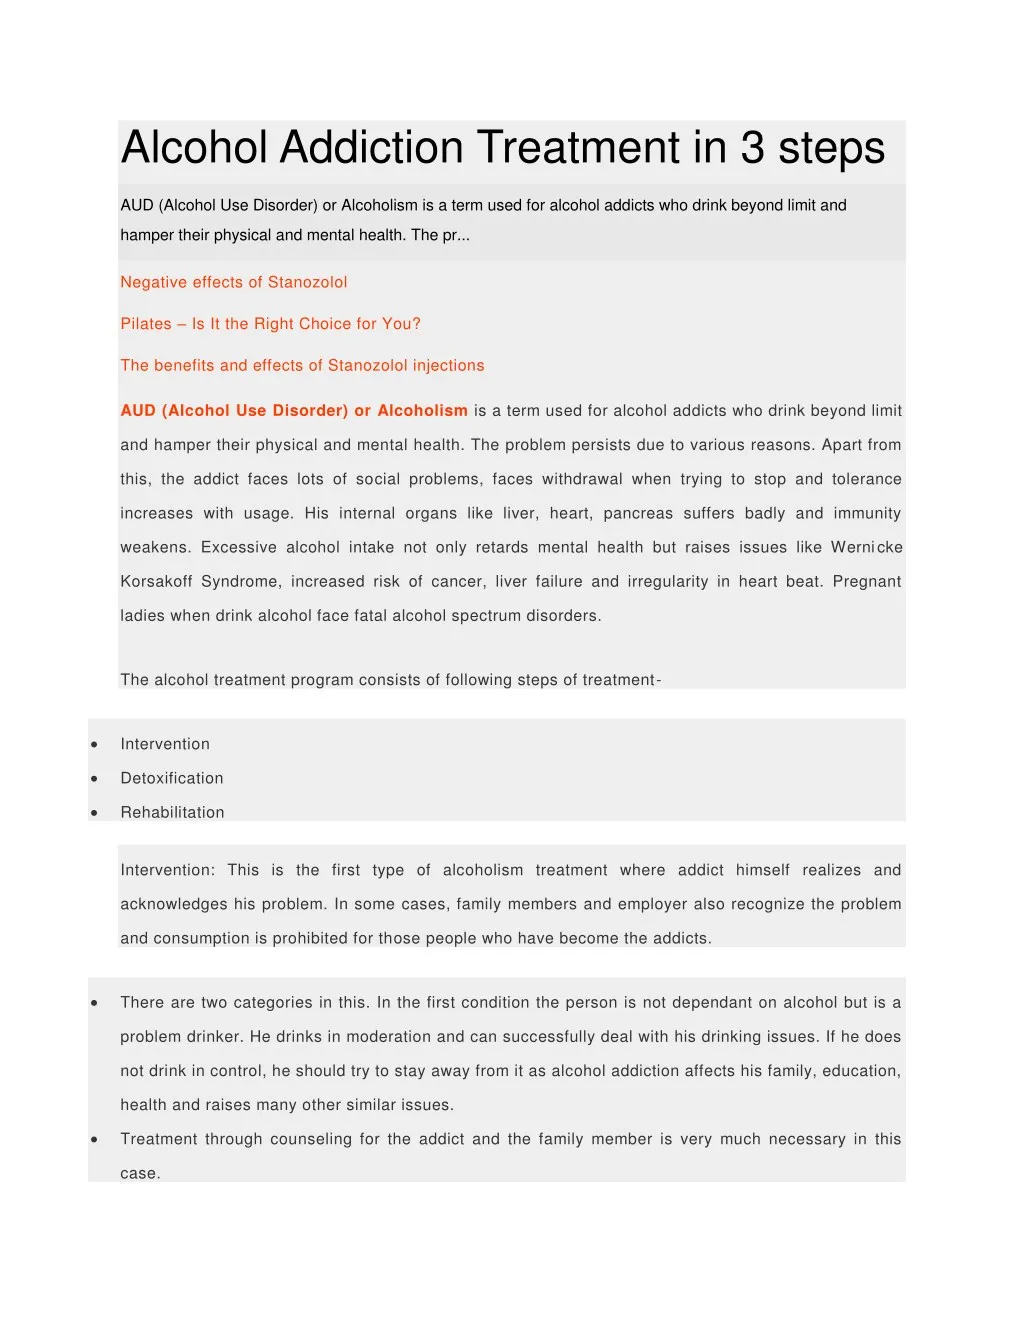 alcohol addiction treatment in 3 steps